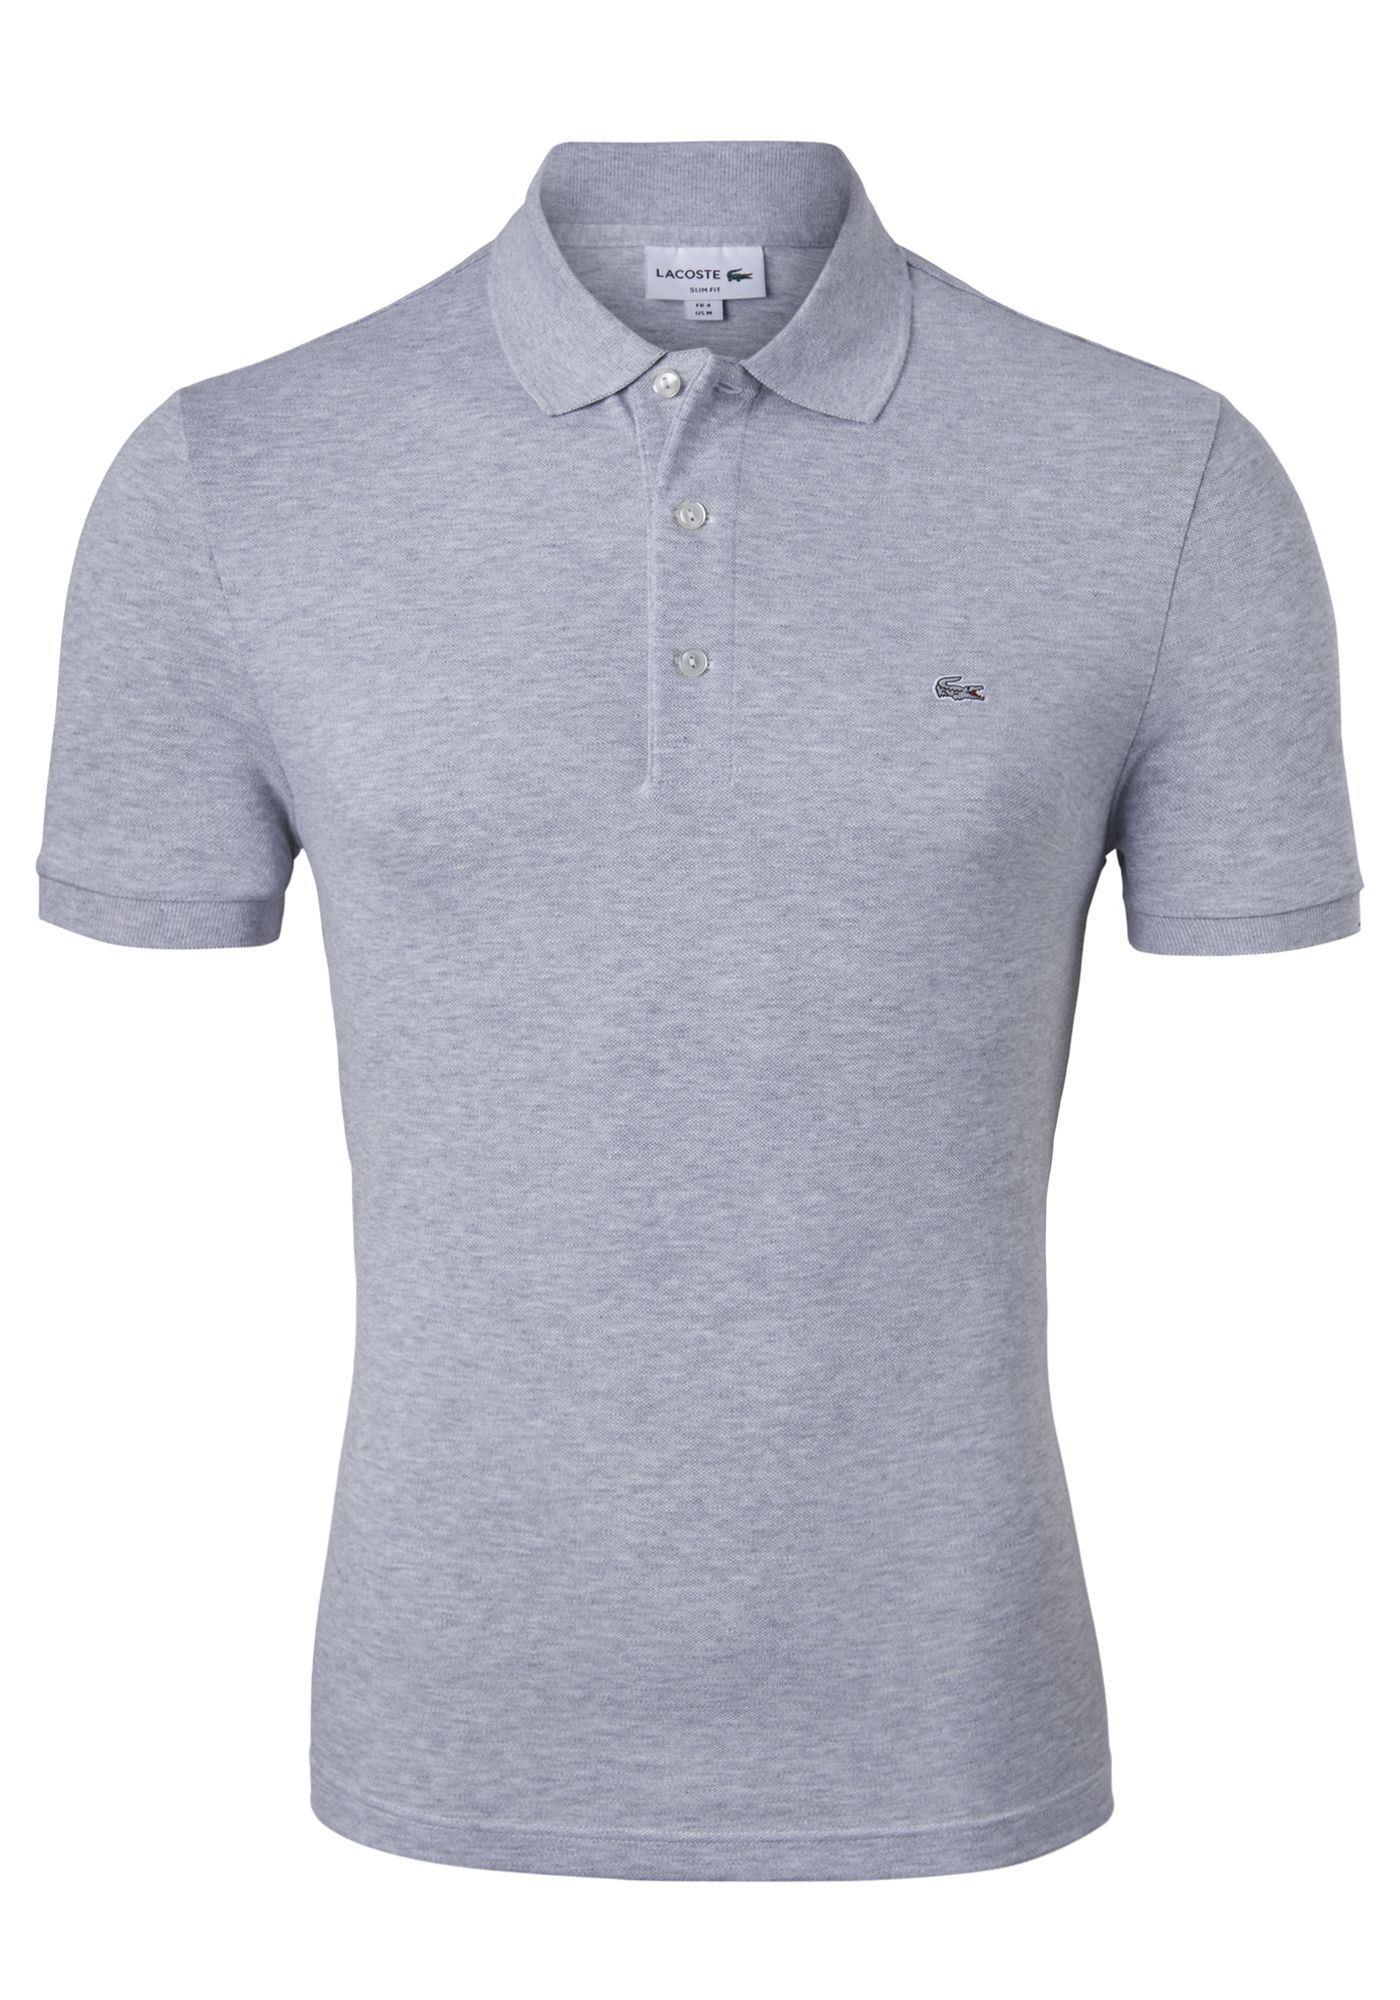 Lacoste stretch fit heren polo extra getailleerd, - Zomer tot 50% korting